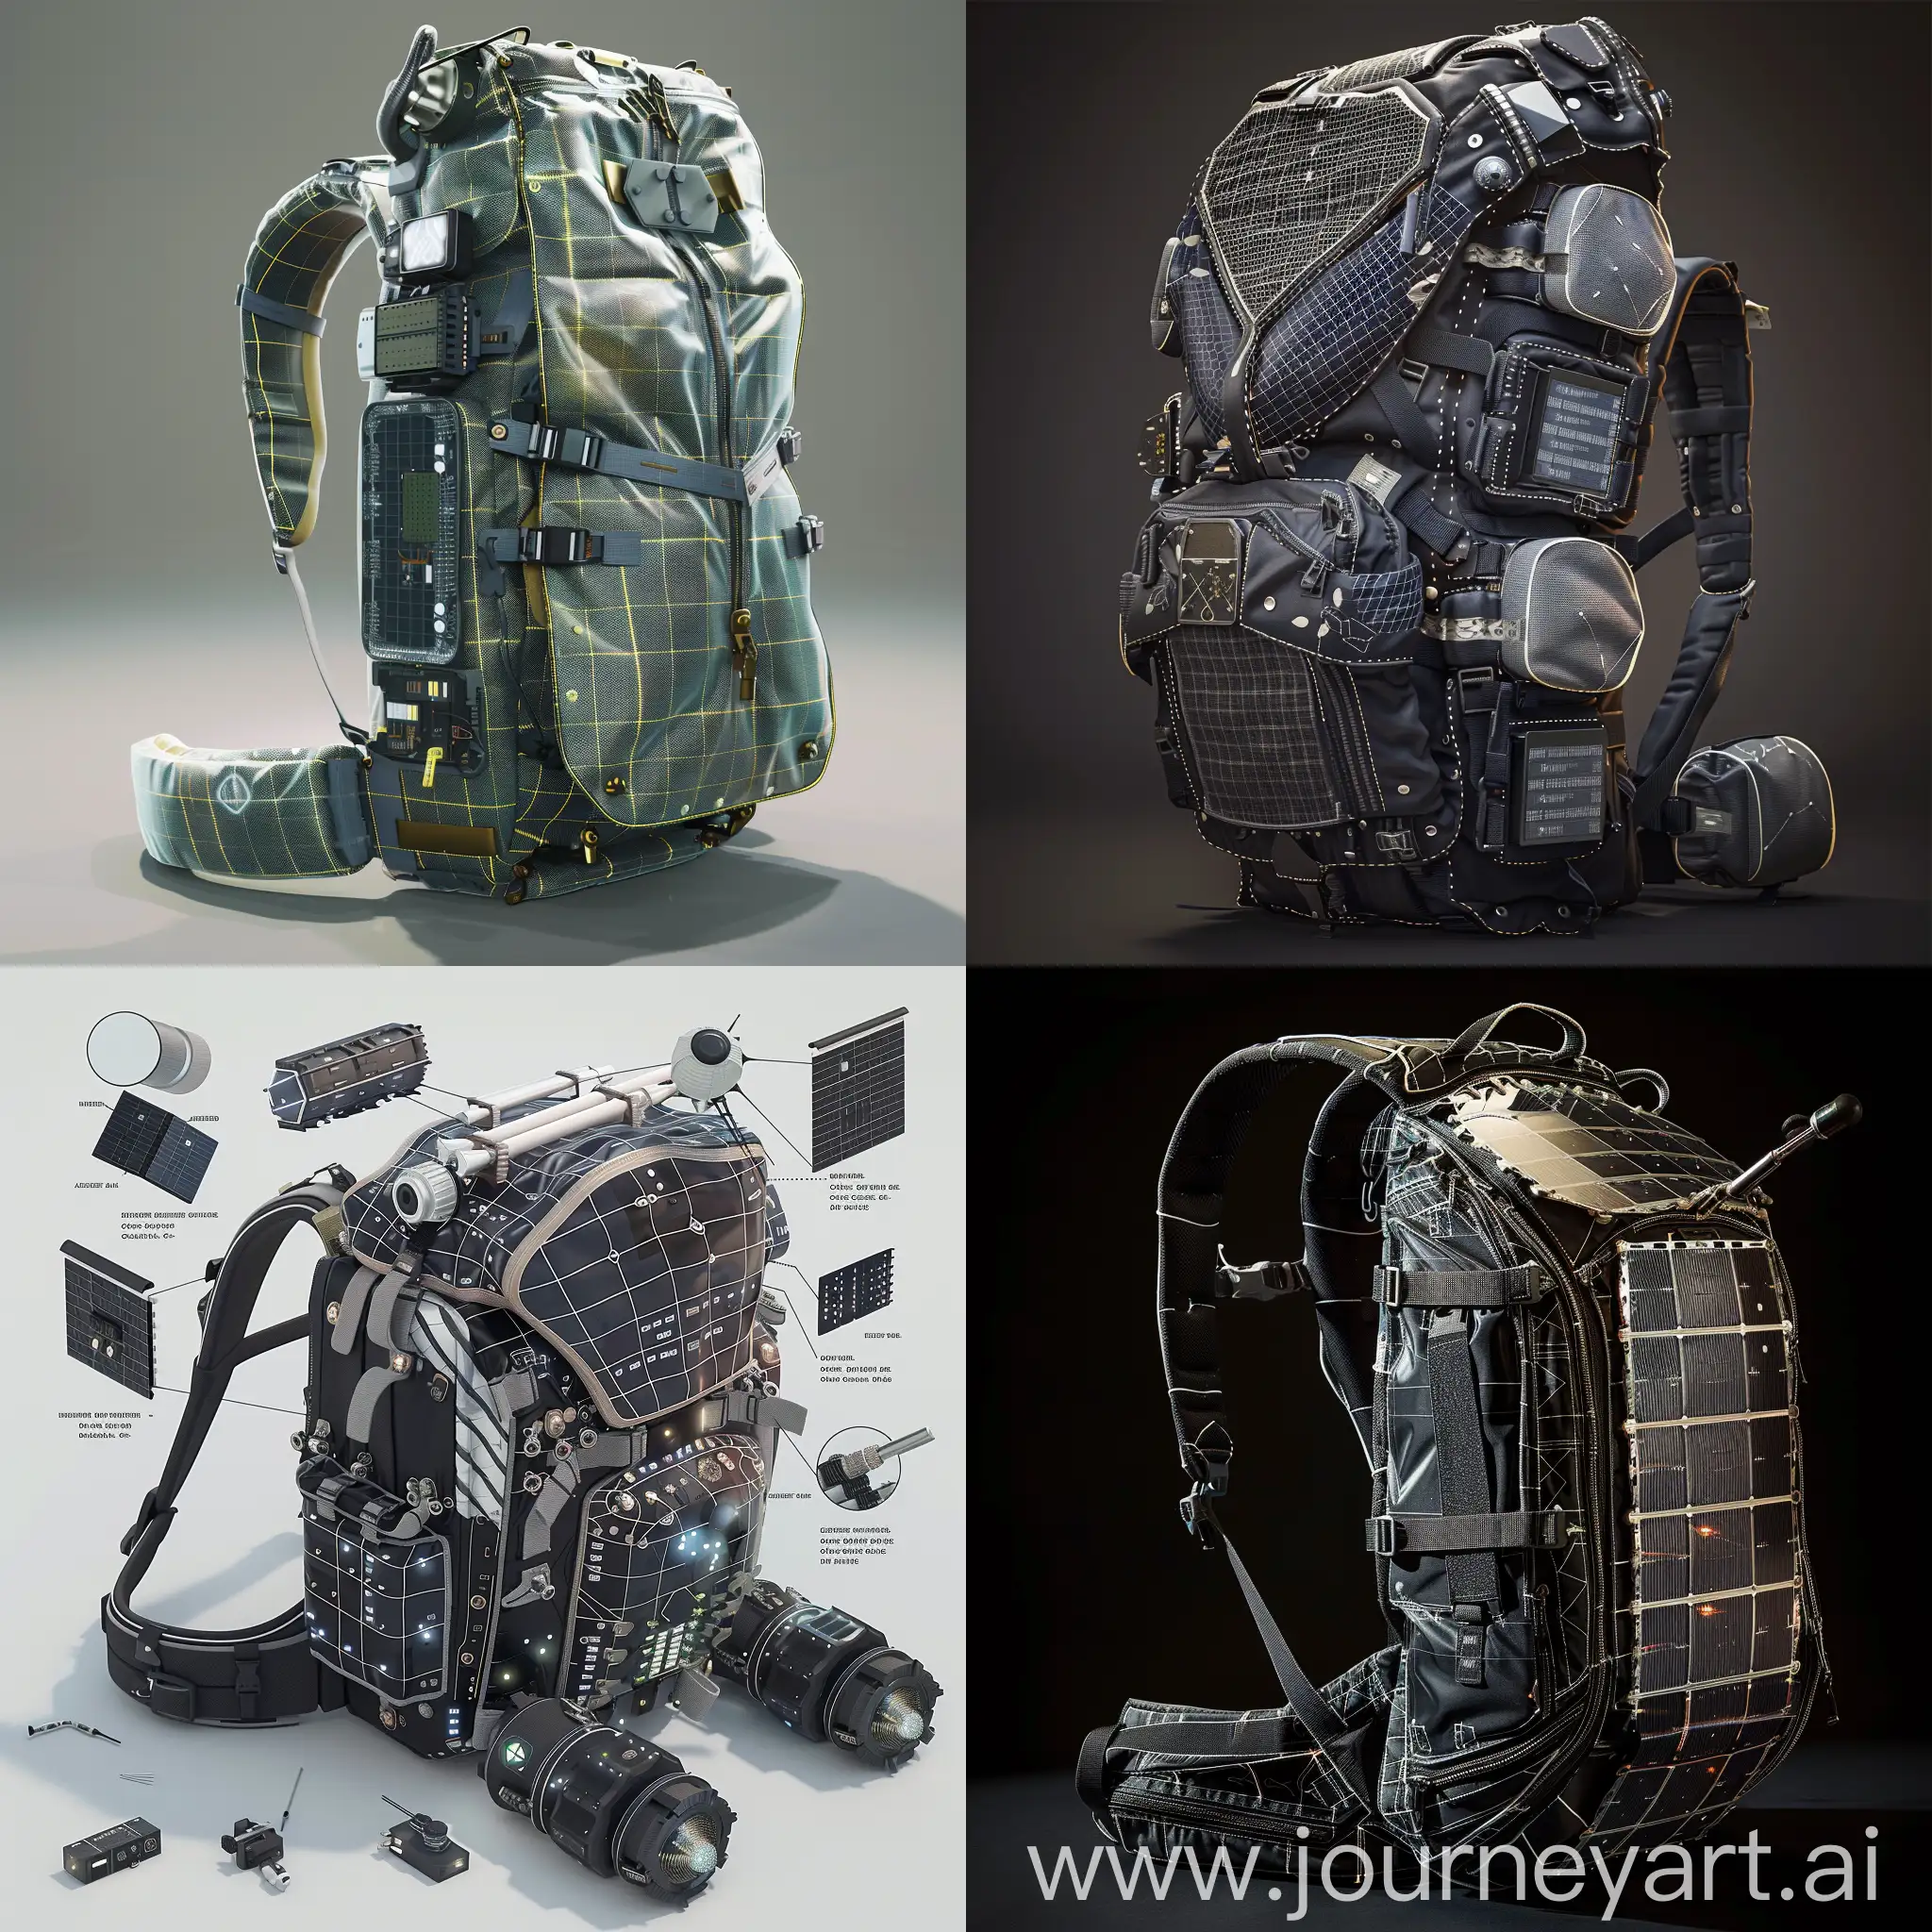 Futuristic-Backpack-with-Advanced-Mirror-Technology-and-AIAssisted-Data-Processing